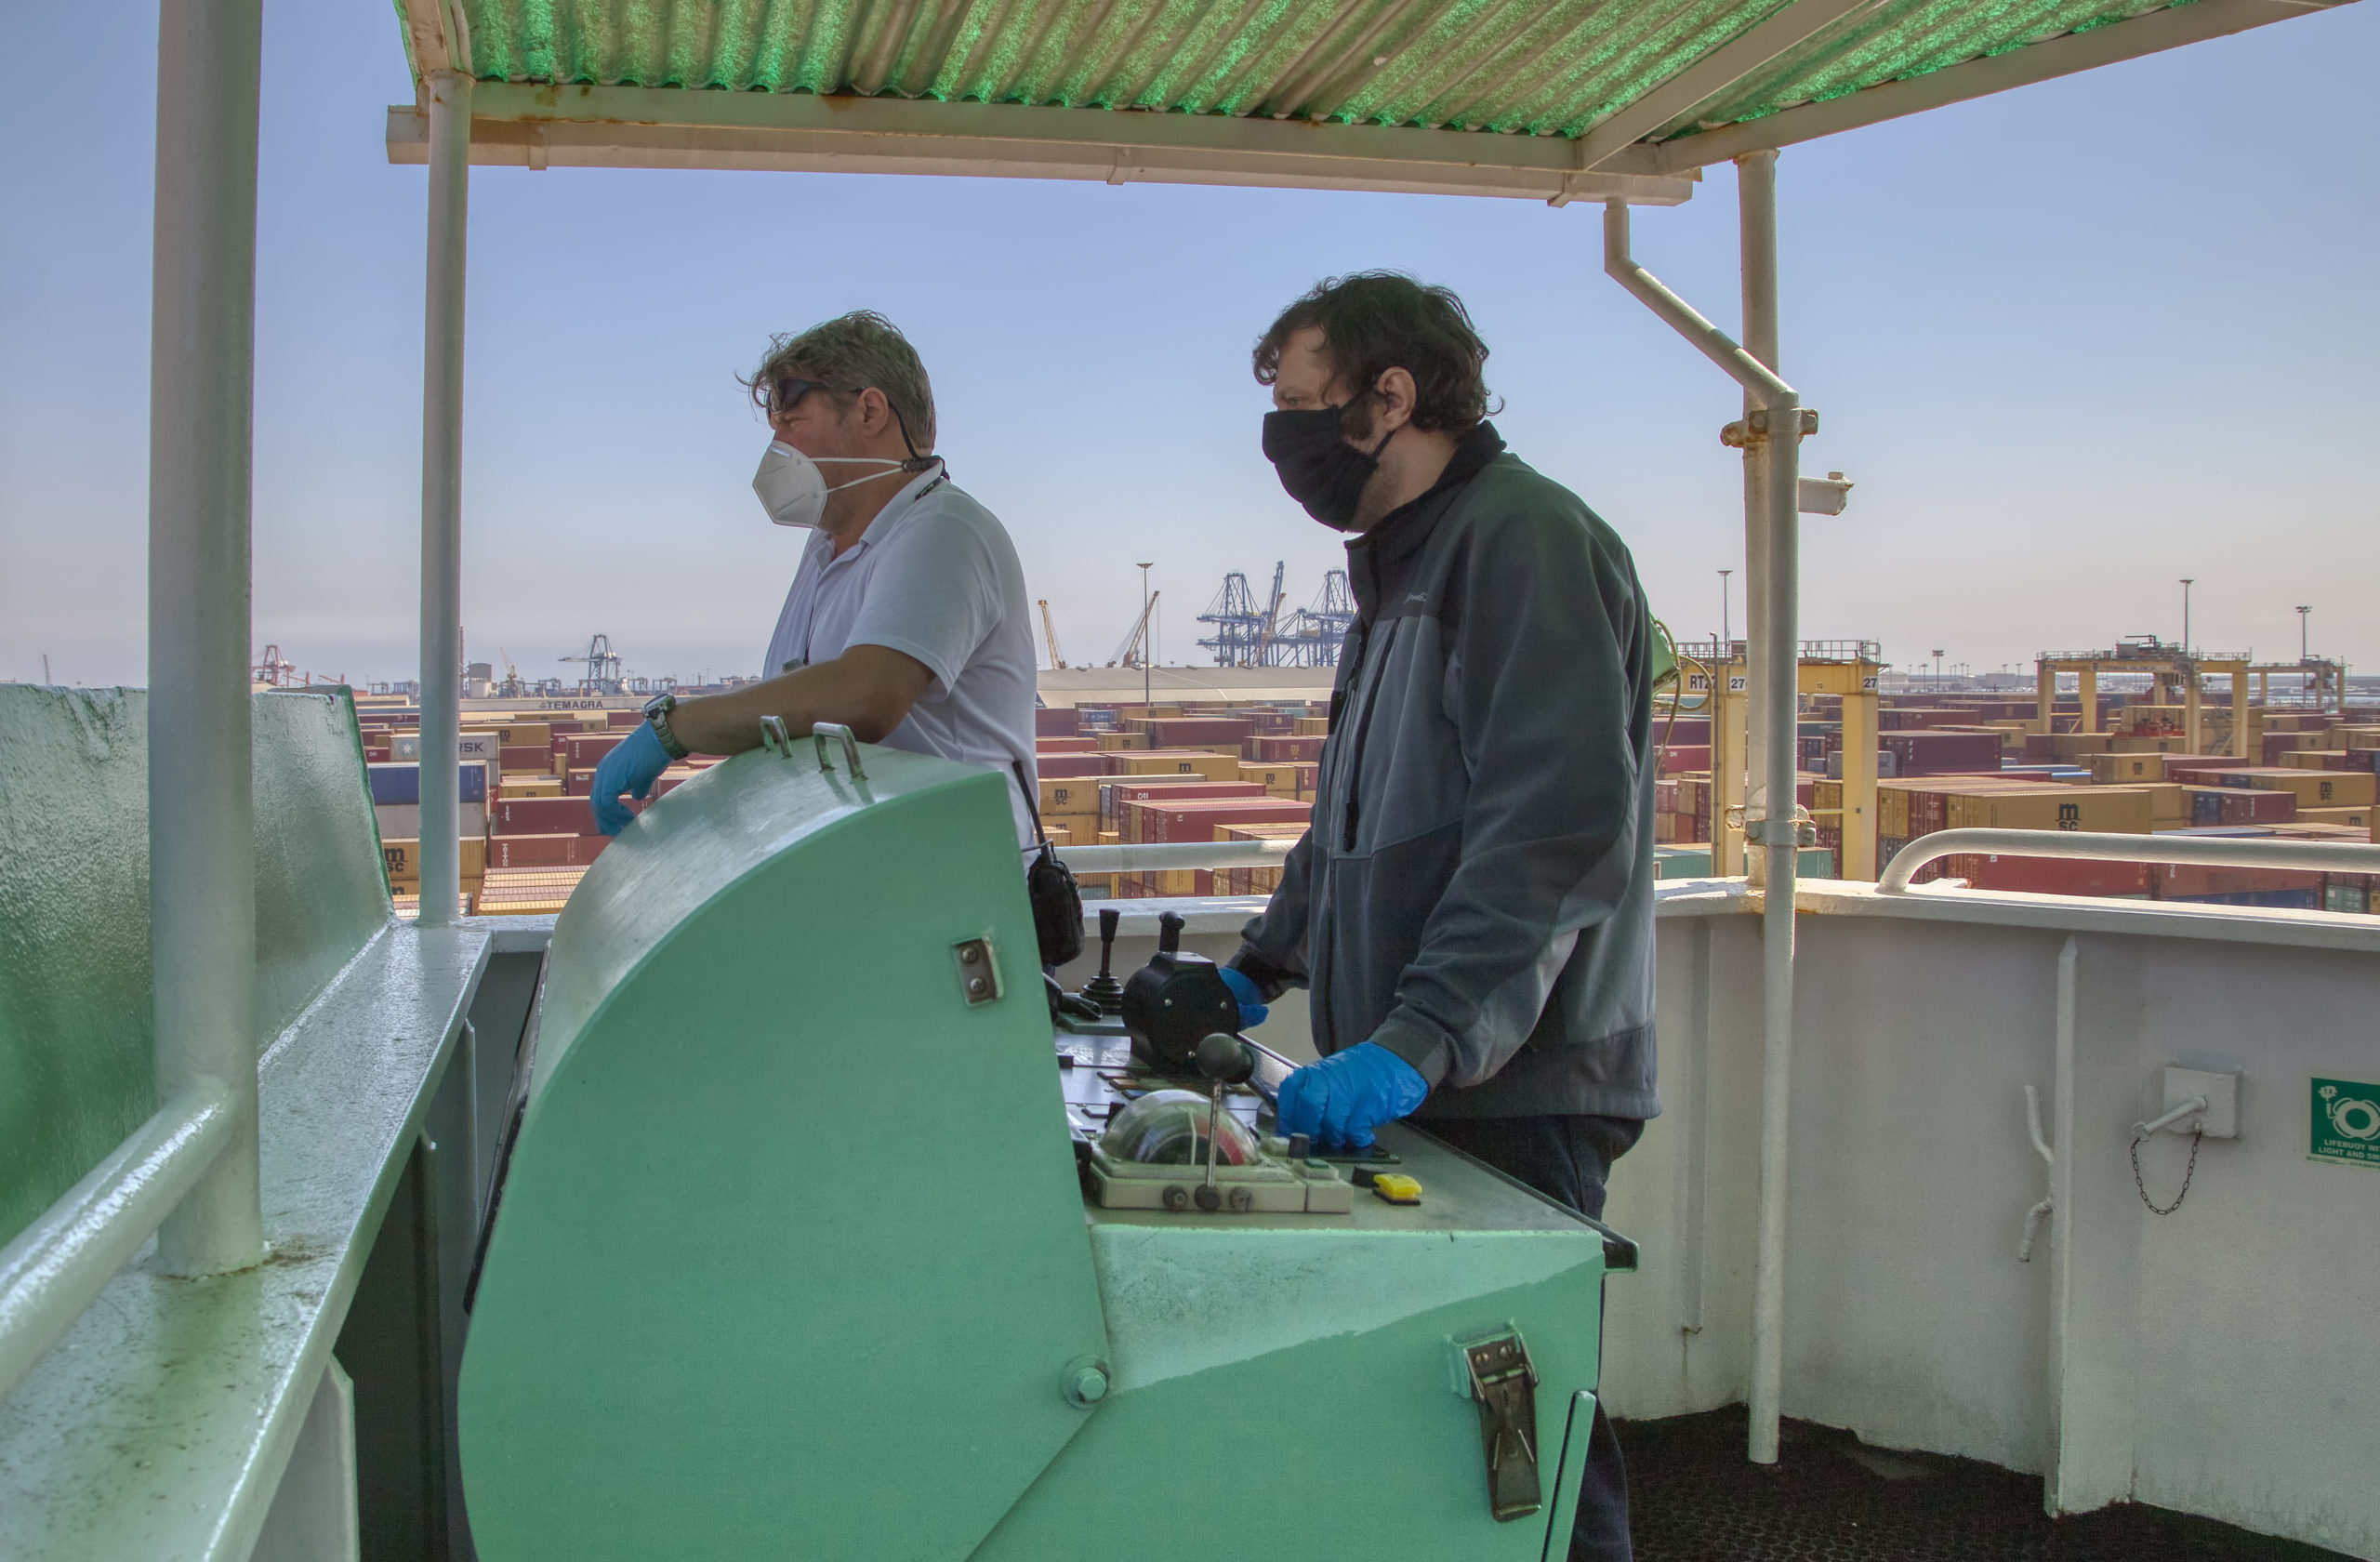 Workers in the Port of Valencia, Spain, wearing a COVID-19 mask